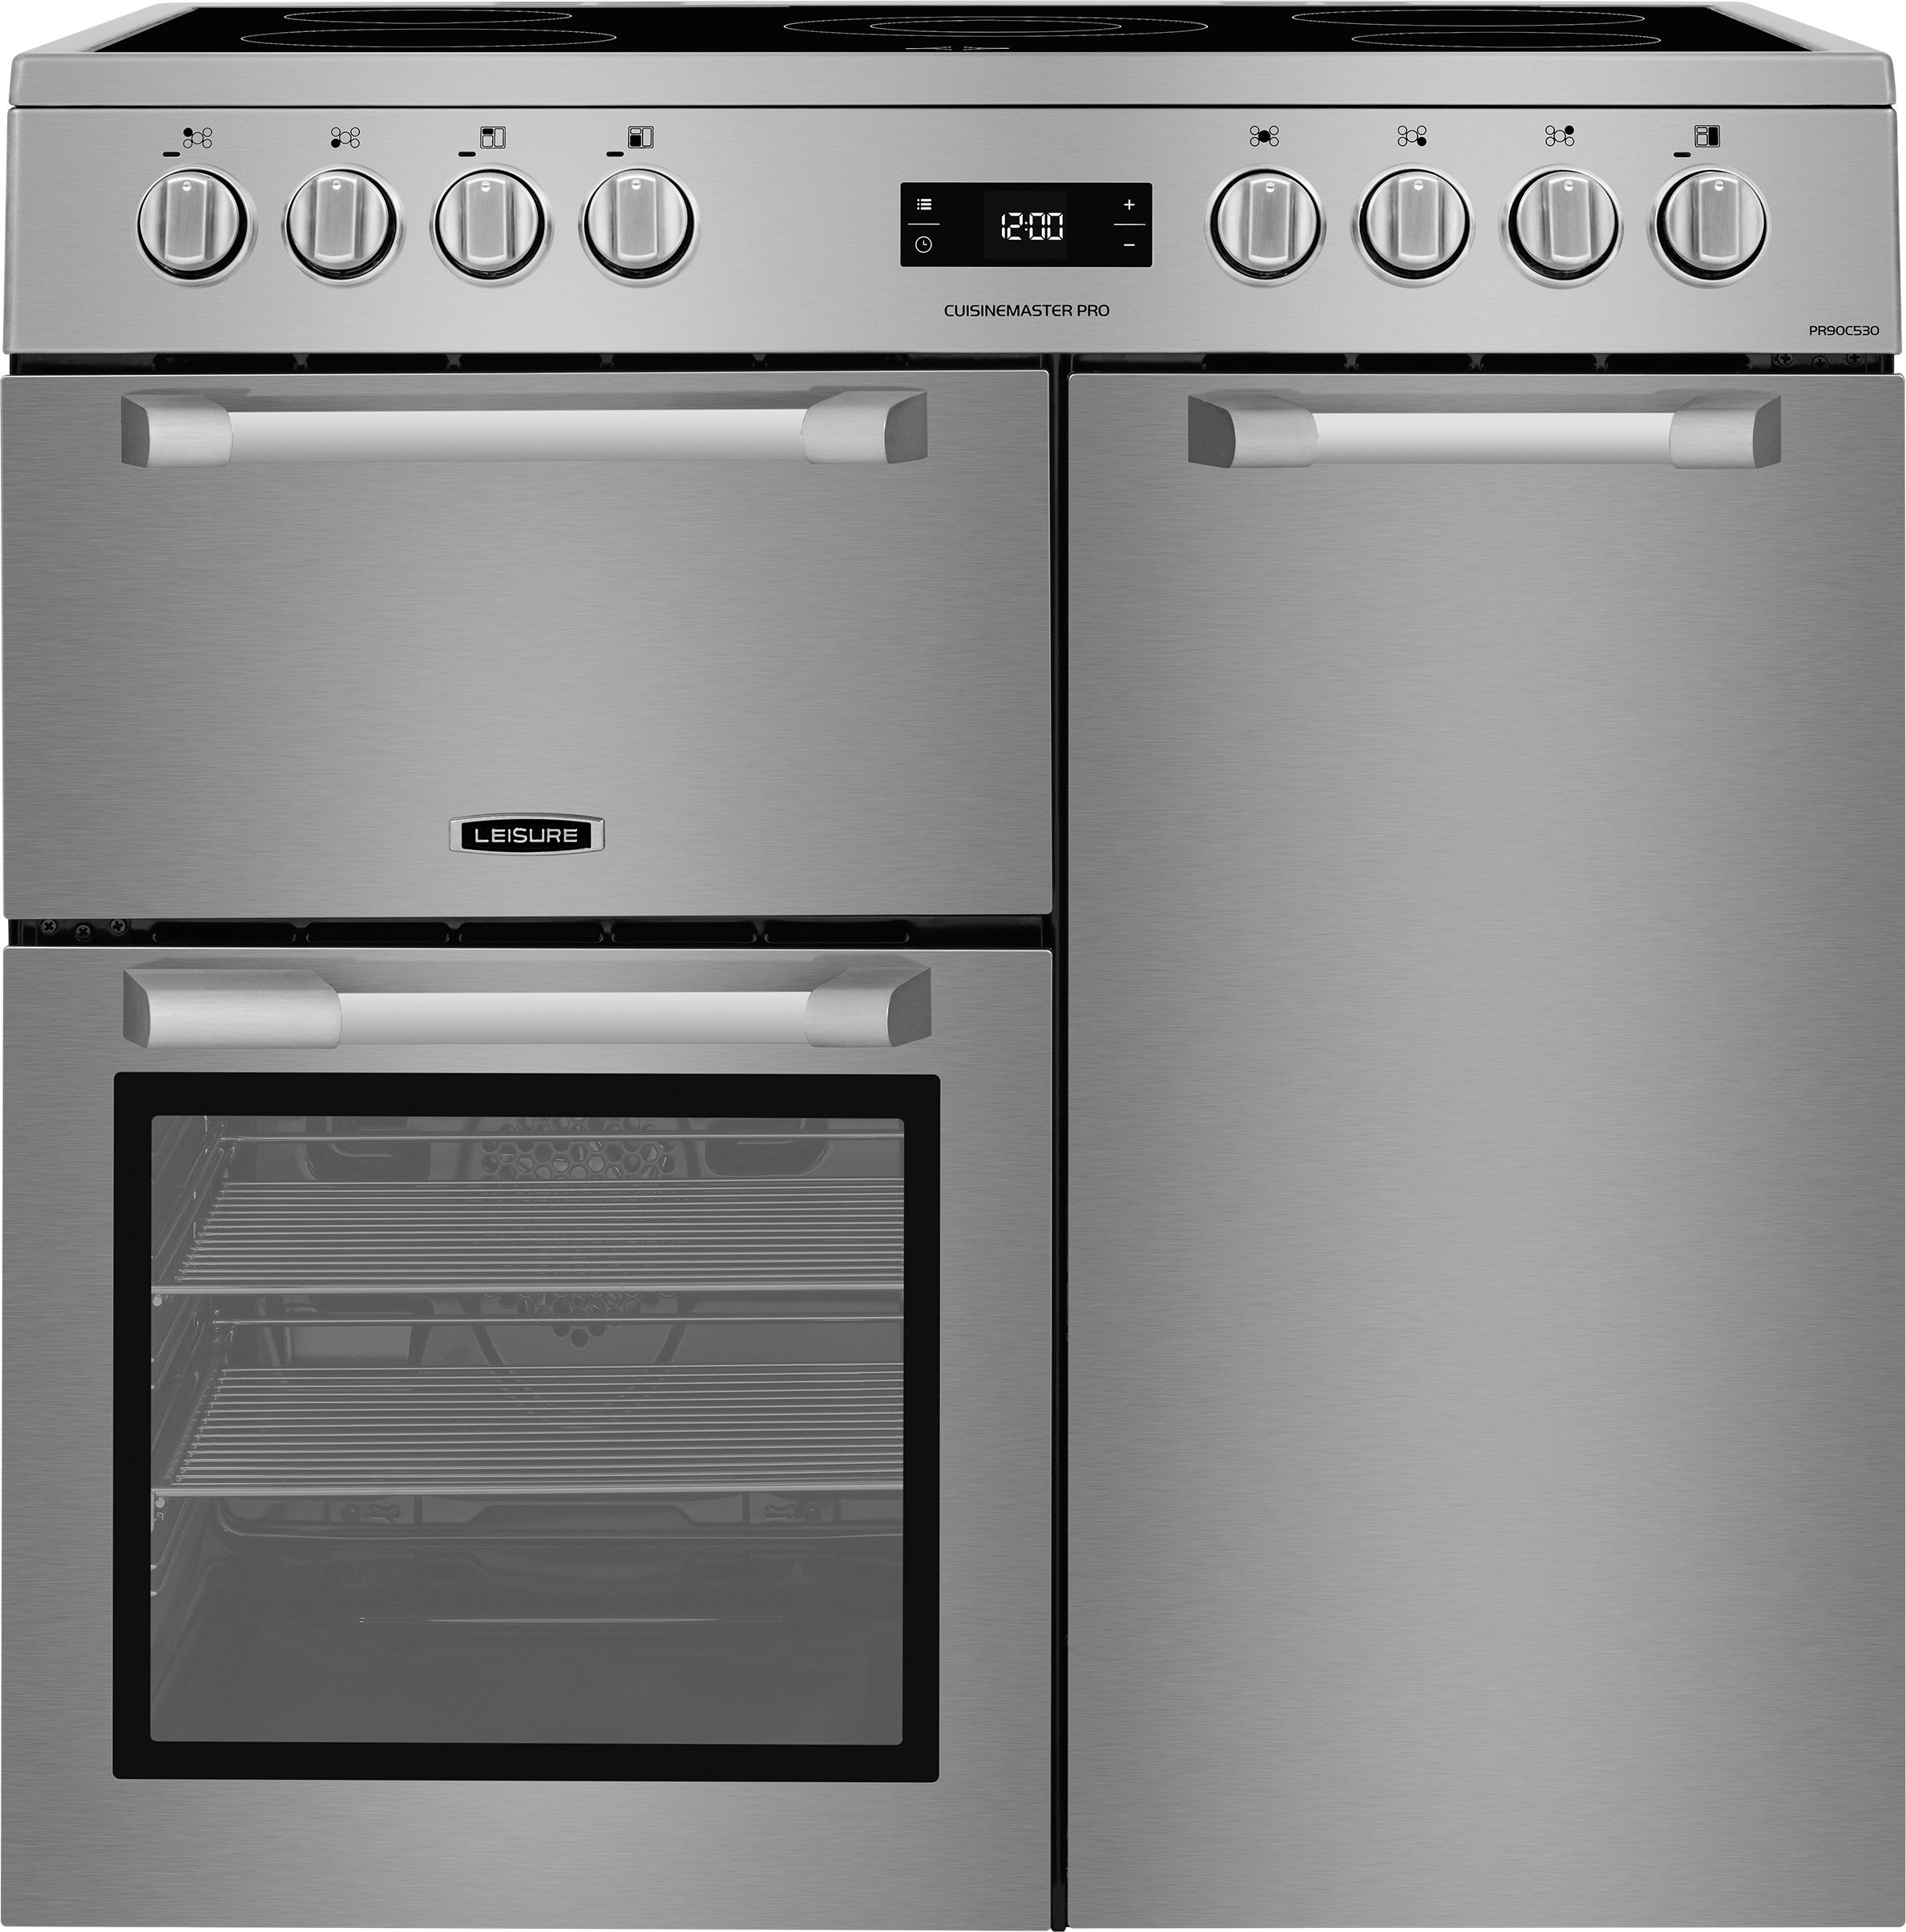 Leisure Cuisinemaster Pro PR90C530X 90cm Electric Range Cooker with Ceramic Hob - Stainless Steel - A Rated, Stainless Steel